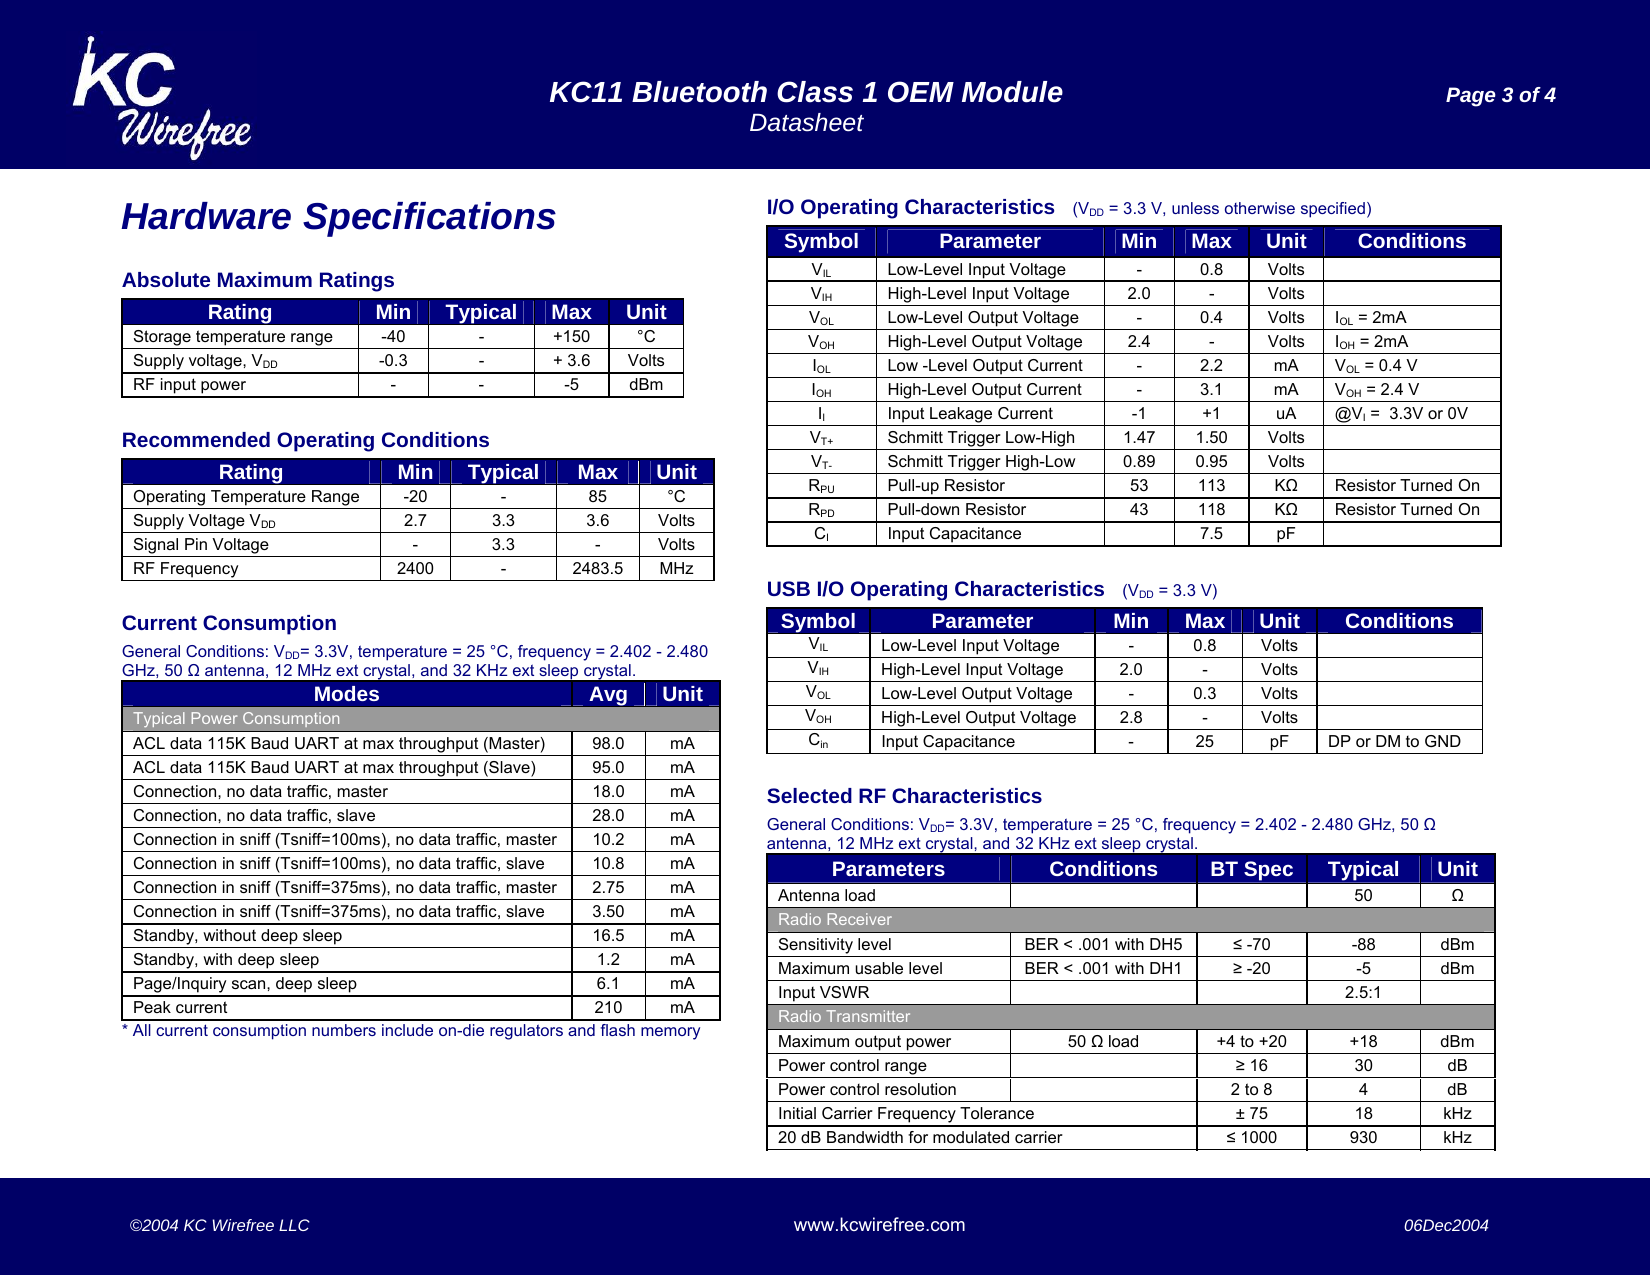   KC11 Bluetooth Class 1 OEM Module  Page 3 of 4  Datasheet    ©2004 KC Wirefree LLC www.kcwirefree.com  06Dec2004   Hardware Specifications  Absolute Maximum Ratings Rating  Min  Typical  Max  Unit Storage temperature range   -40  -  +150  °C Supply voltage, VDD -0.3 - + 3.6 Volts RF input power  -  -  -5  dBm  Recommended Operating Conditions Rating  Min  Typical  Max  Unit Operating Temperature Range  -20  -  85  °C Supply Voltage VDD 2.7 3.3 3.6 Volts Signal Pin Voltage  -  3.3  -  Volts RF Frequency  2400  -  2483.5  MHz  Current Consumption General Conditions: VDD= 3.3V, temperature = 25 °C, frequency = 2.402 - 2.480 GHz, 50 Ω antenna, 12 MHz ext crystal, and 32 KHz ext sleep crystal. Modes  Avg  Unit Typical Power Consumption ACL data 115K Baud UART at max throughput (Master)  98.0  mA ACL data 115K Baud UART at max throughput (Slave)  95.0  mA Connection, no data traffic, master  18.0  mA Connection, no data traffic, slave  28.0  mA Connection in sniff (Tsniff=100ms), no data traffic, master   10.2  mA Connection in sniff (Tsniff=100ms), no data traffic, slave   10.8  mA Connection in sniff (Tsniff=375ms), no data traffic, master   2.75  mA Connection in sniff (Tsniff=375ms), no data traffic, slave   3.50  mA Standby, without deep sleep  16.5  mA Standby, with deep sleep  1.2  mA Page/Inquiry scan, deep sleep  6.1  mA Peak current   210  mA * All current consumption numbers include on-die regulators and flash memory I/O Operating Characteristics   (VDD = 3.3 V, unless otherwise specified) Symbol  Parameter  Min  Max  Unit  Conditions VIL Low-Level Input Voltage  - 0.8 Volts  VIH High-Level Input Voltage  2.0  - Volts  VOL  Low-Level Output Voltage  -  0.4  Volts  IOL = 2mA VOH  High-Level Output Voltage  2.4  -  Volts  IOH = 2mA IOL  Low -Level Output Current  -  2.2  mA  VOL = 0.4 V IOH  High-Level Output Current  -  3.1  mA  VOH = 2.4 V II  Input Leakage Current  -1  +1  uA  @VI =  3.3V or 0V VT+  Schmitt Trigger Low-High  1.47  1.50  Volts   VT-  Schmitt Trigger High-Low  0.89 0.95 Volts  RPU Pull-up Resistor  53 113 KΩ Resistor Turned On RPD Pull-down Resistor  43 118 KΩ Resistor Turned On CI Input Capacitance    7.5 pF   USB I/O Operating Characteristics   (VDD = 3.3 V) Symbol  Parameter  Min  Max  Unit  Conditions VIL Low-Level Input Voltage  -  0.8  Volts   VIH High-Level Input Voltage  2.0  -  Volts   VOL Low-Level Output Voltage  -  0.3  Volts   VOH High-Level Output Voltage  2.8  -  Volts   Cin Input Capacitance  -  25  pF  DP or DM to GND  Selected RF Characteristics  General Conditions: VDD= 3.3V, temperature = 25 °C, frequency = 2.402 - 2.480 GHz, 50 Ω antenna, 12 MHz ext crystal, and 32 KHz ext sleep crystal. Parameters  Conditions  BT Spec  Typical  Unit Antenna load      50  Ω Radio Receiver Sensitivity level  BER &lt; .001 with DH5  ≤ -70  -88  dBm Maximum usable level  BER &lt; .001 with DH1  ≥ -20  -5  dBm Input VSWR      2.5:1   Radio Transmitter Maximum output power  50 Ω load  +4 to +20  +18  dBm Power control range    ≥ 16  30  dB Power control resolution    2 to 8  4  dB Initial Carrier Frequency Tolerance  ± 75  18  kHz 20 dB Bandwidth for modulated carrier  ≤ 1000  930  kHz 